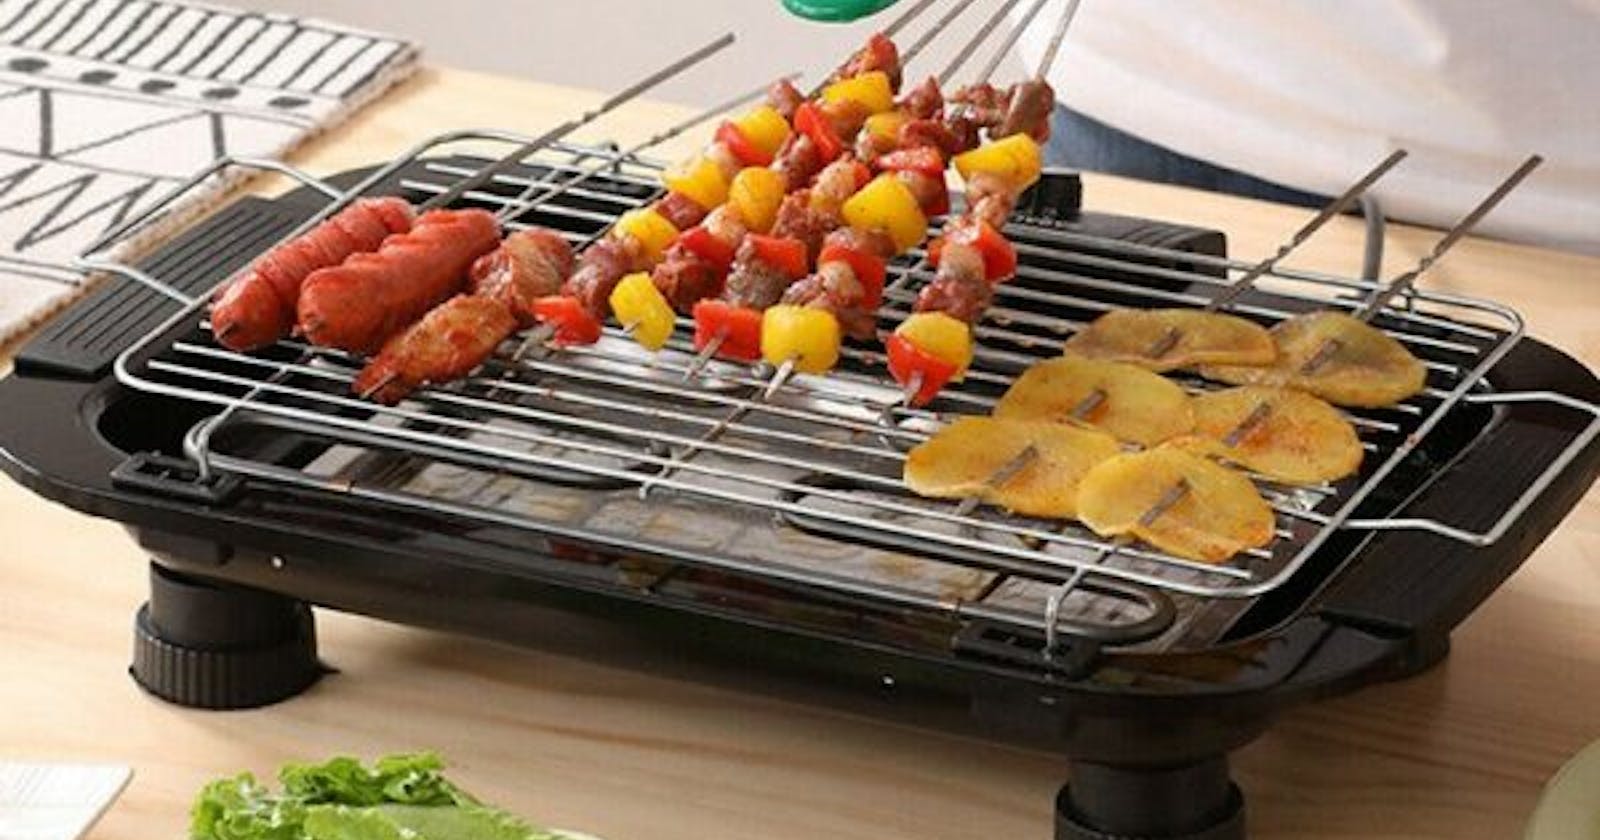 Portable Household Electric Oven Smokeless Indoor Barbecue Machine Hotplate BBQ Grill Meat Pan For Party Home